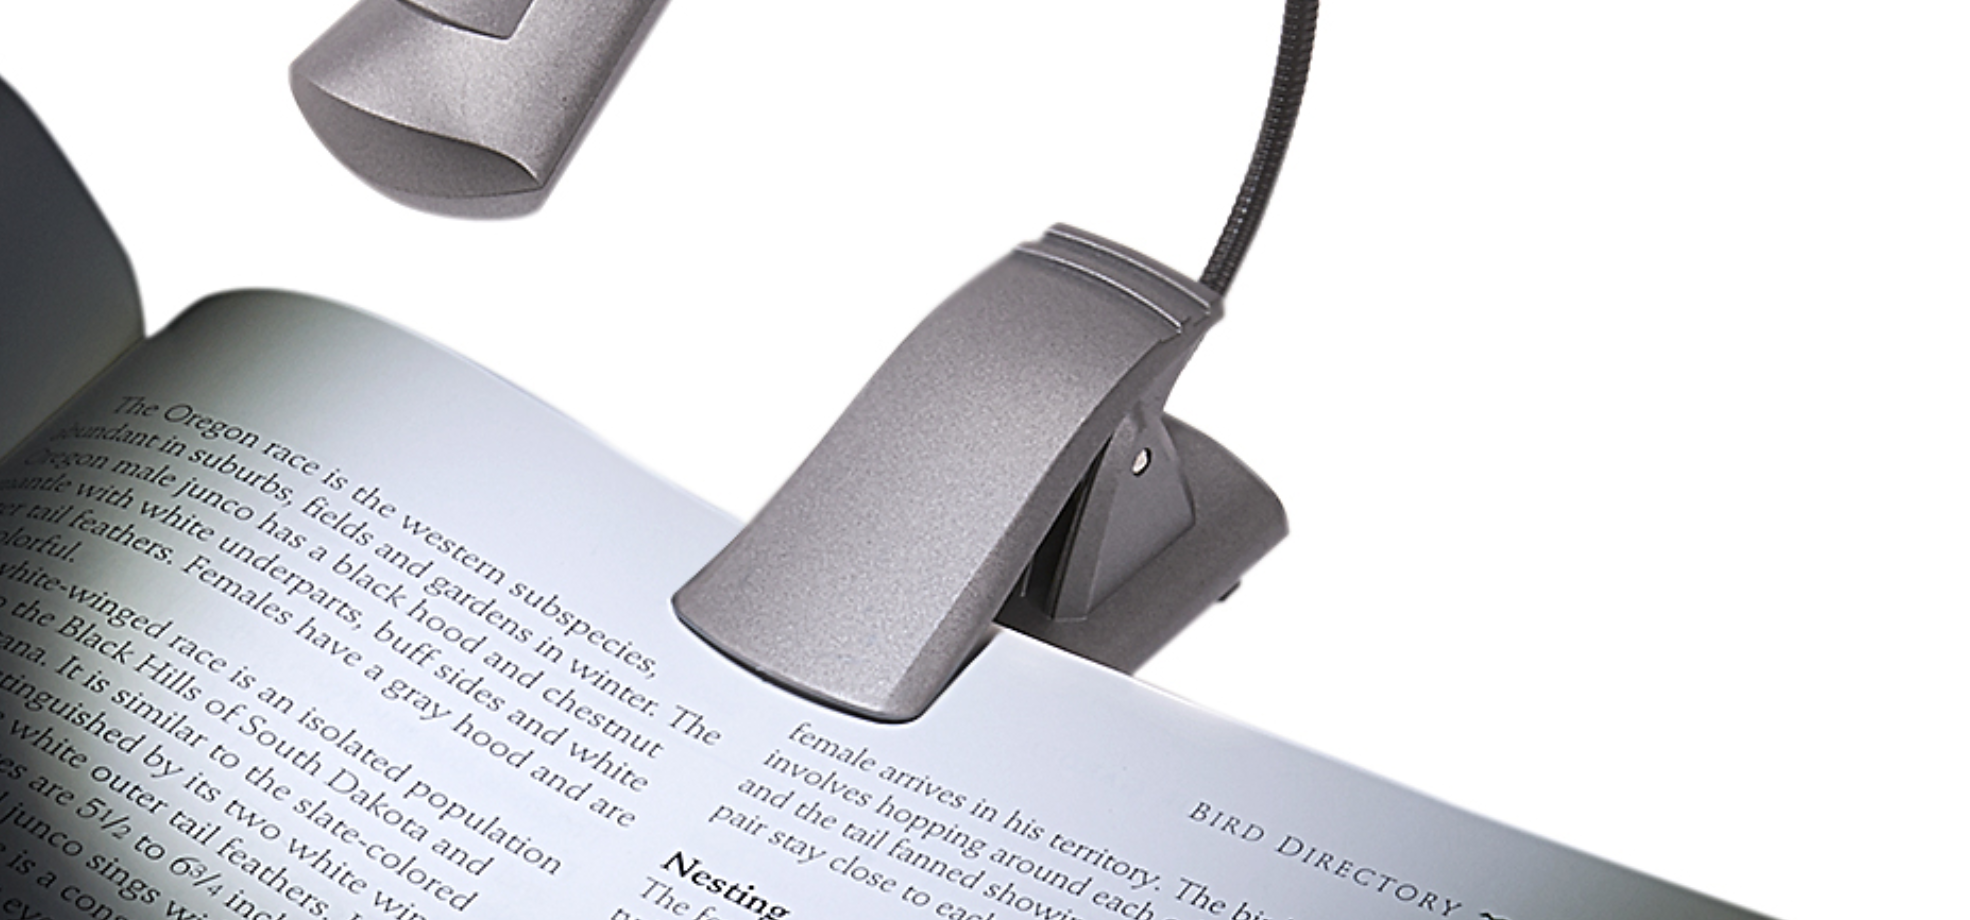 Image of a book illuminated by clip on book light reading aid